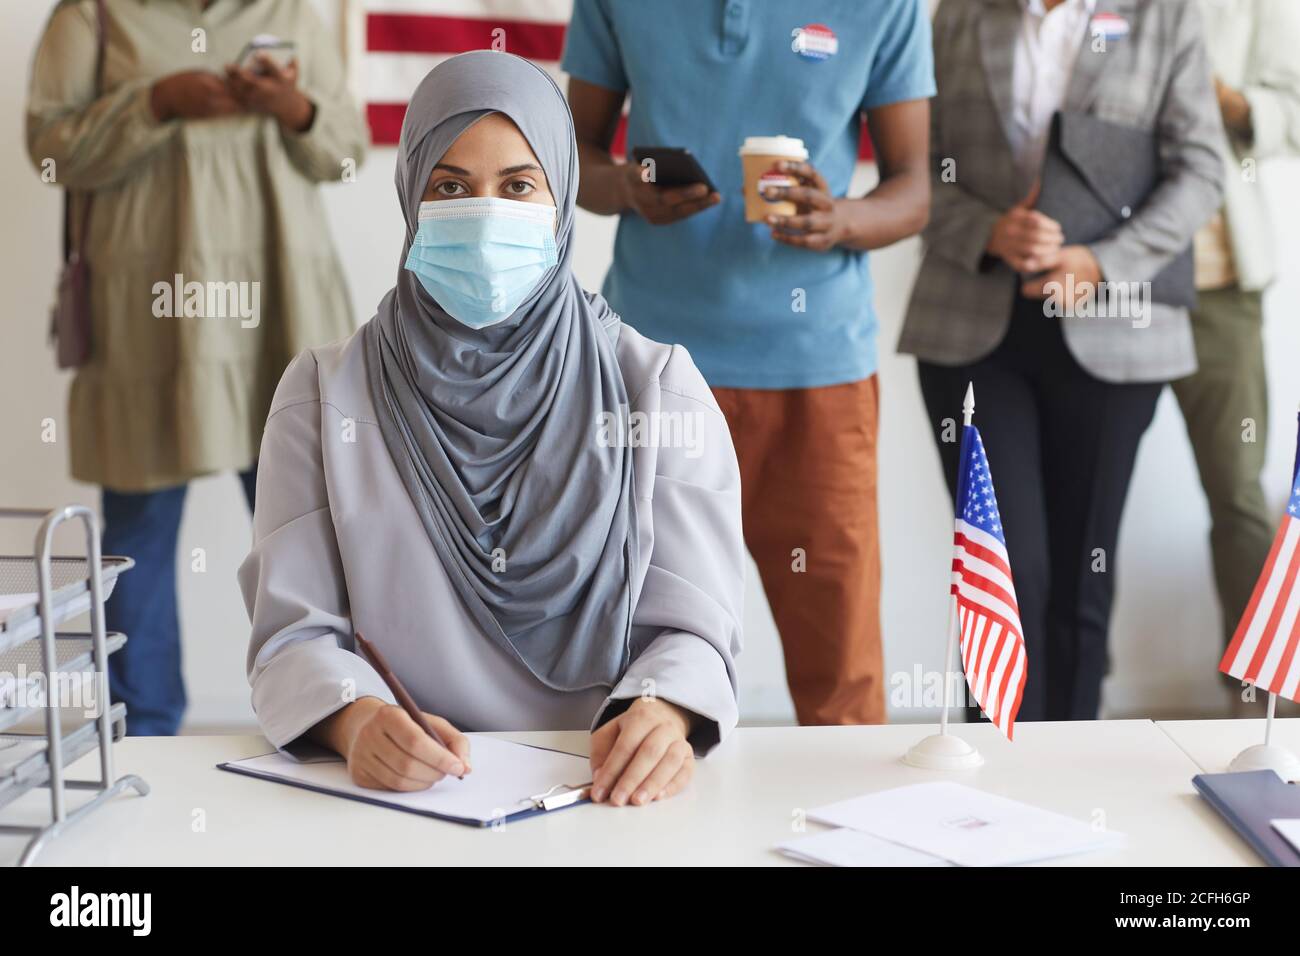 Multi-ethnic group of people standing in row and wearing masks at polling station on election day, focus on young Arab woman looking at camera while registering for voting, copy space Stock Photo